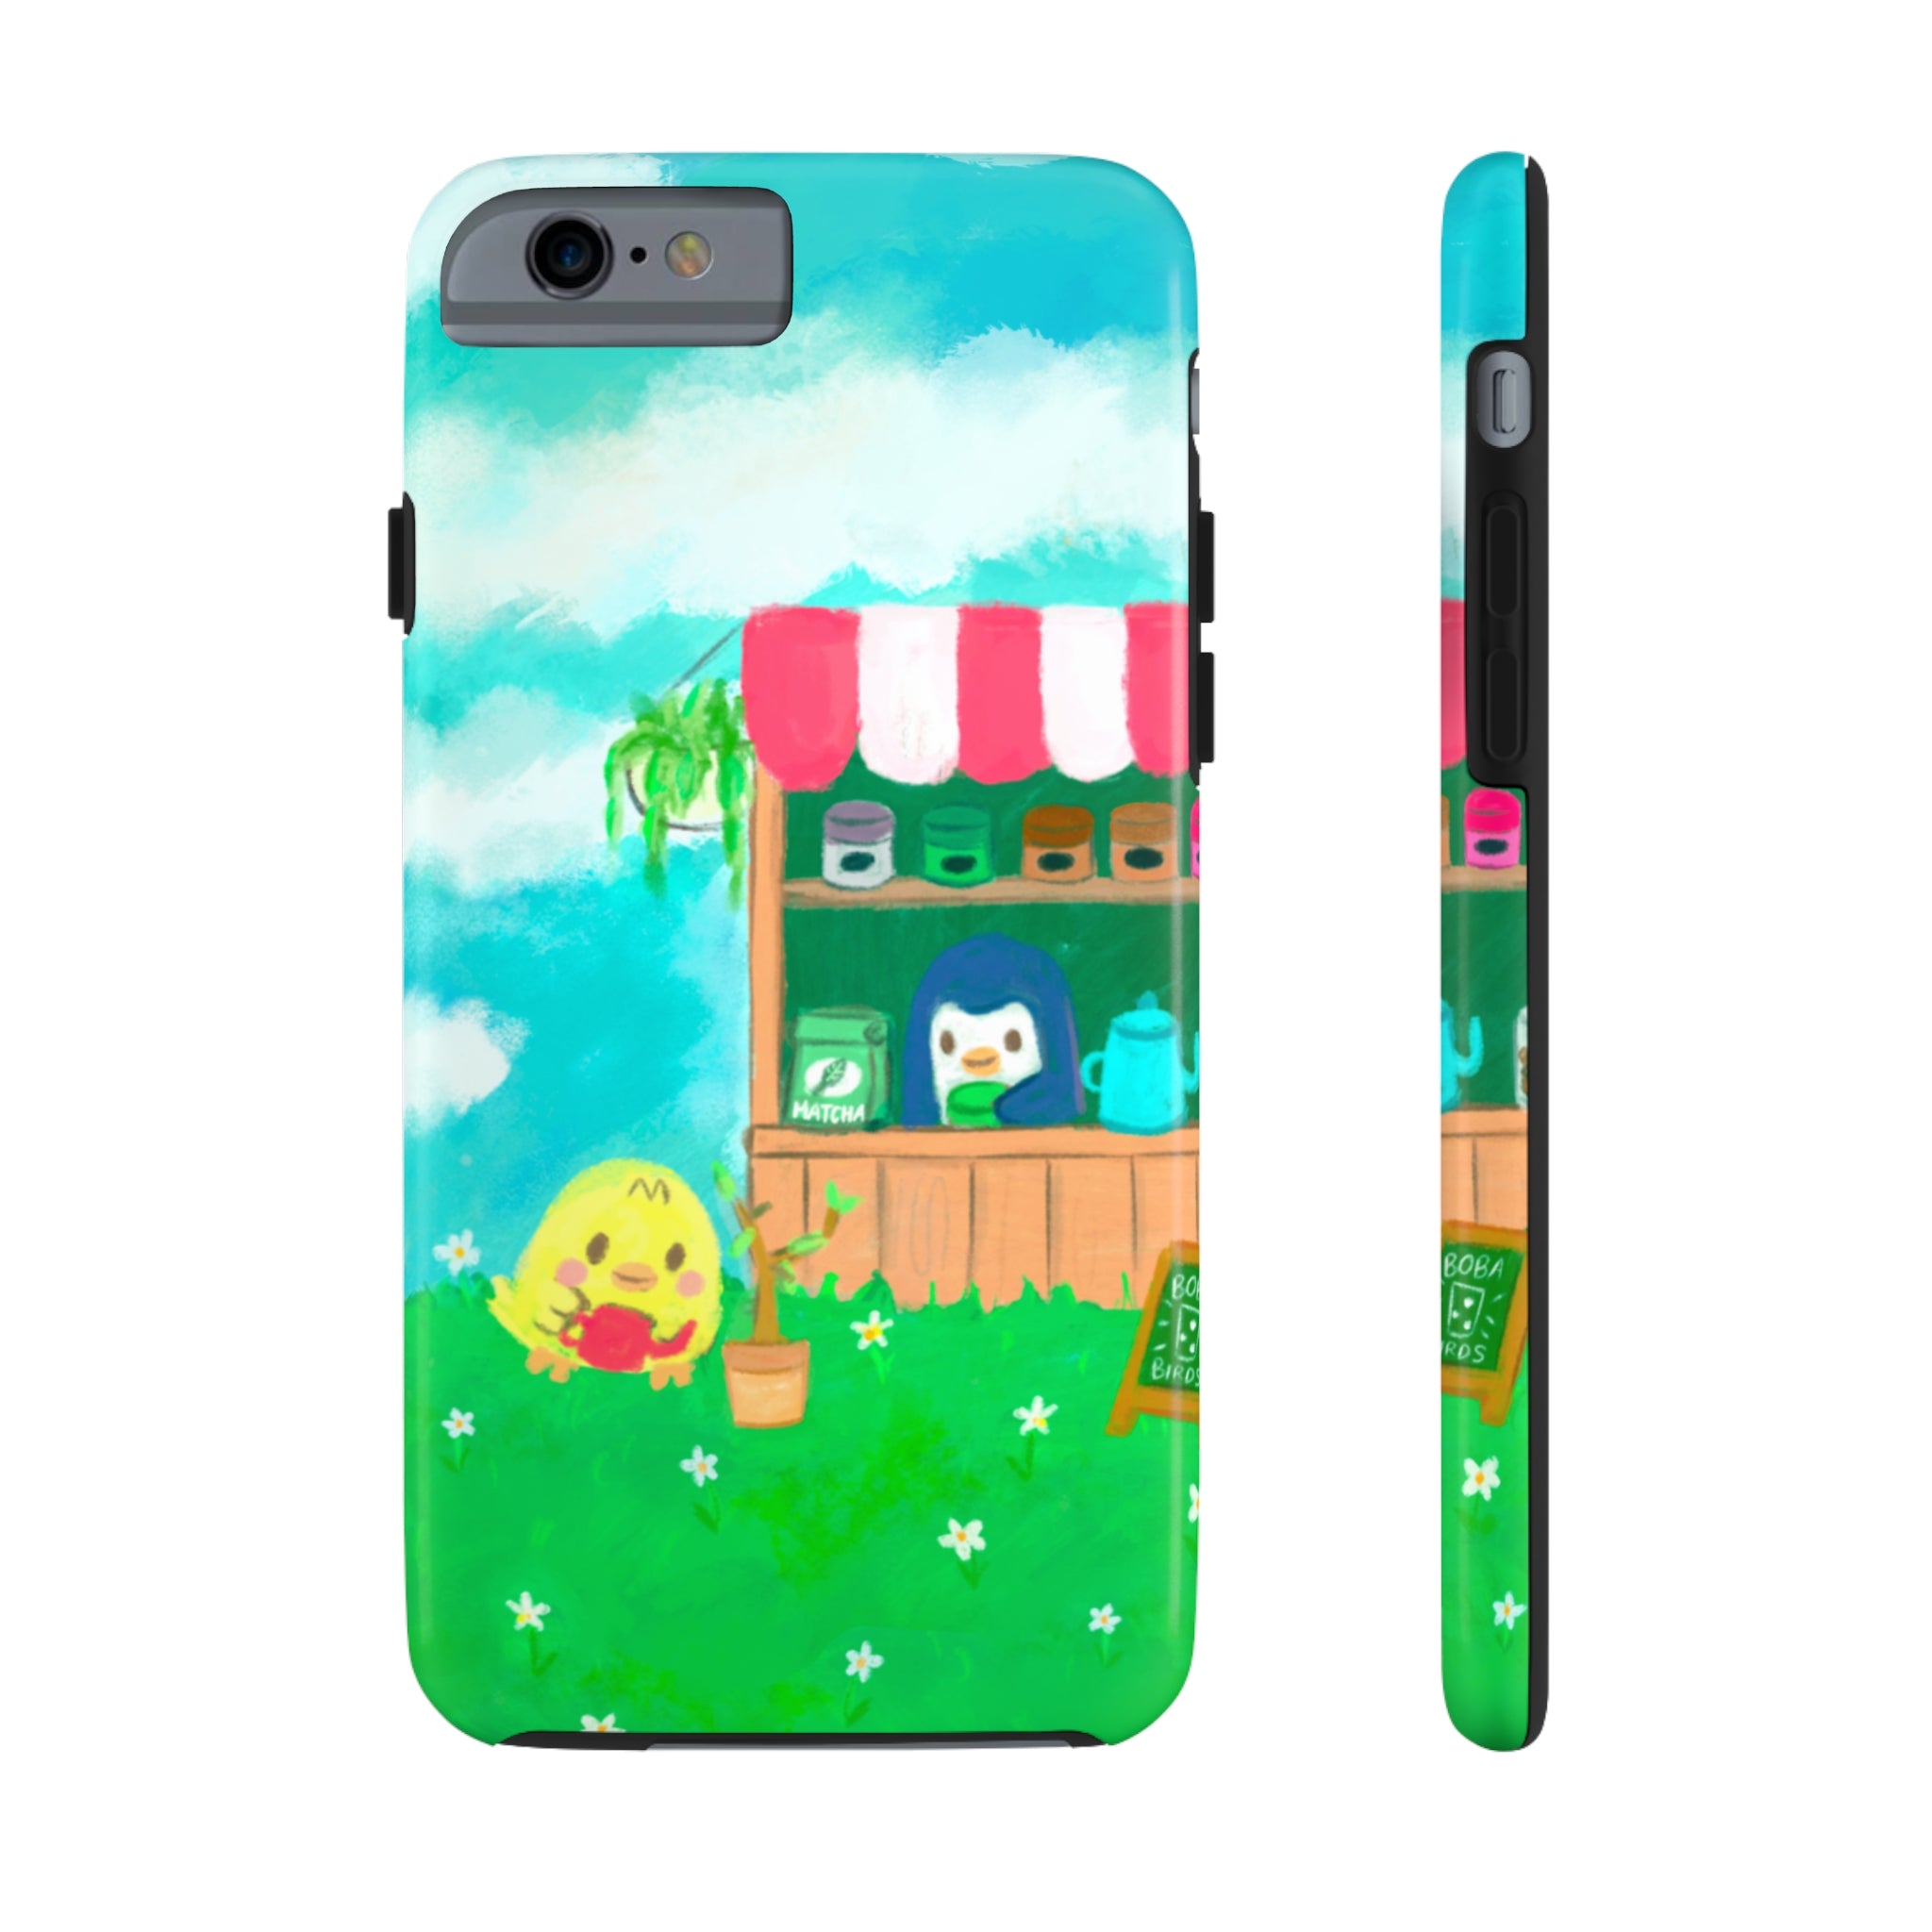 Our Small Cafe iPhone Case